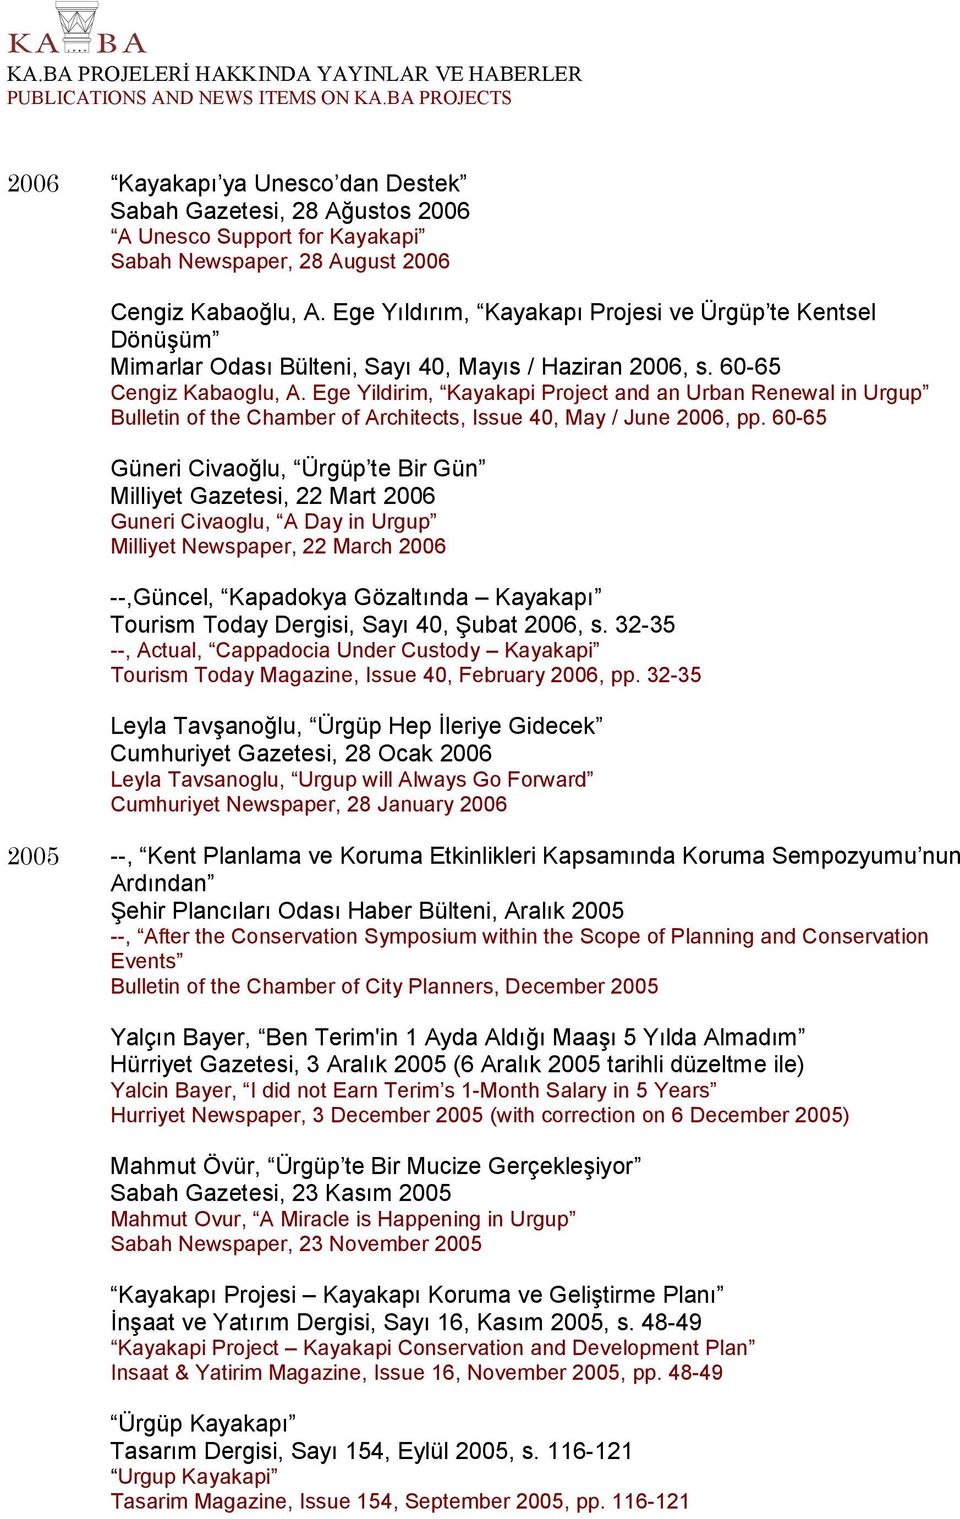 Ege Yildirim, Kayakapi Project and an Urban Renewal in Urgup Bulletin of the Chamber of Architects, Issue 40, May / June 2006, pp.